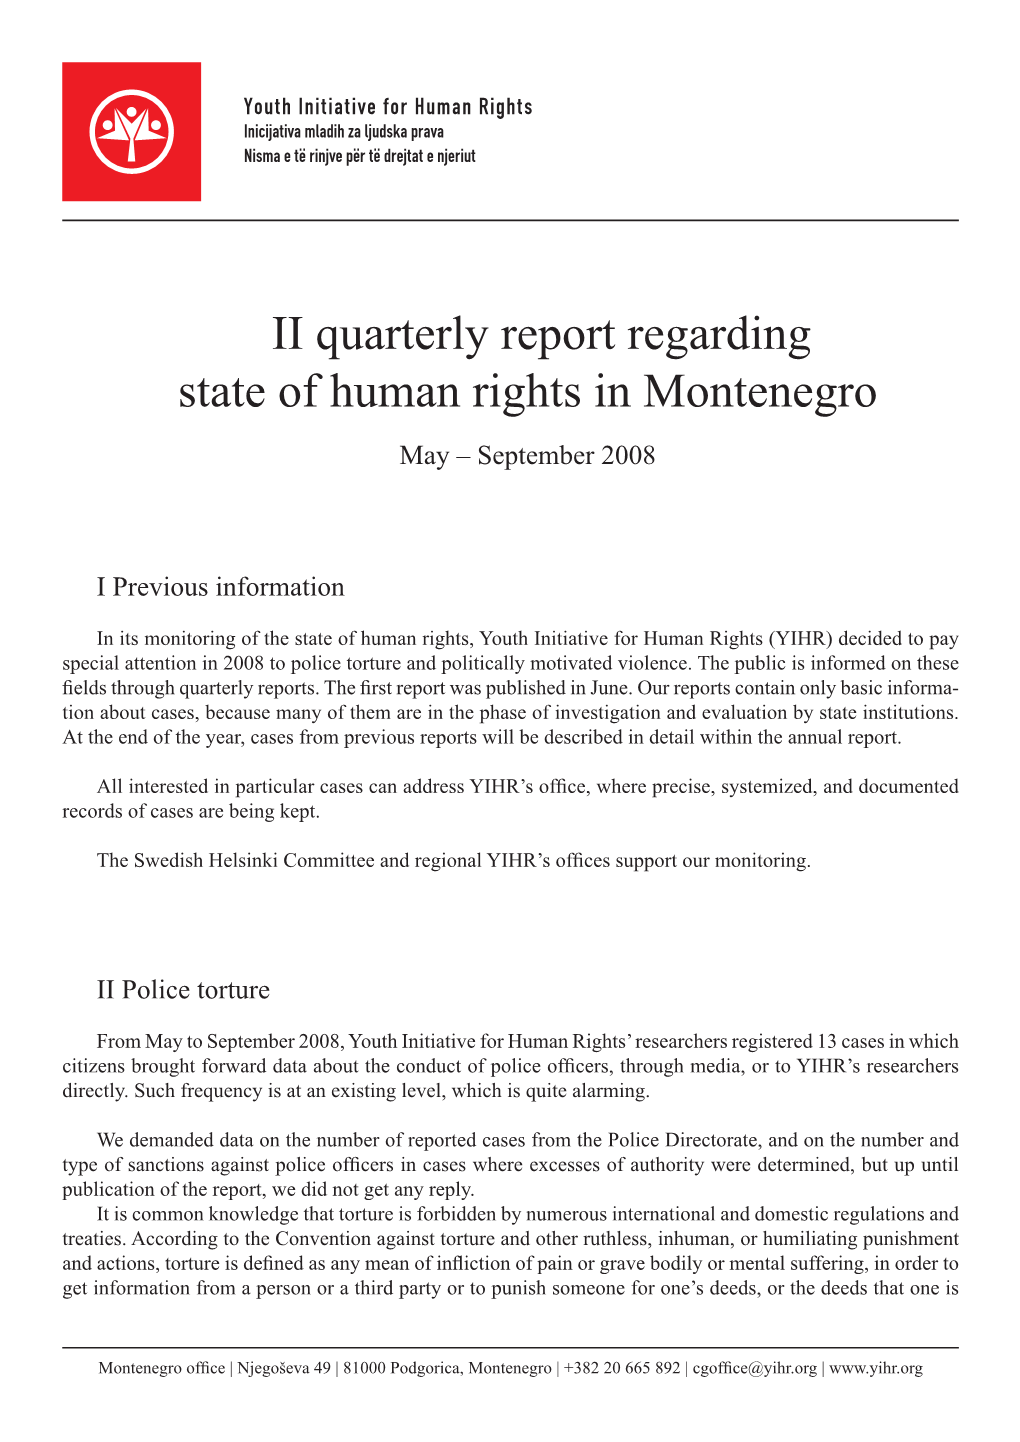 II Quarterly Report Regarding State of Human Rights in Montenegro May – September 2008